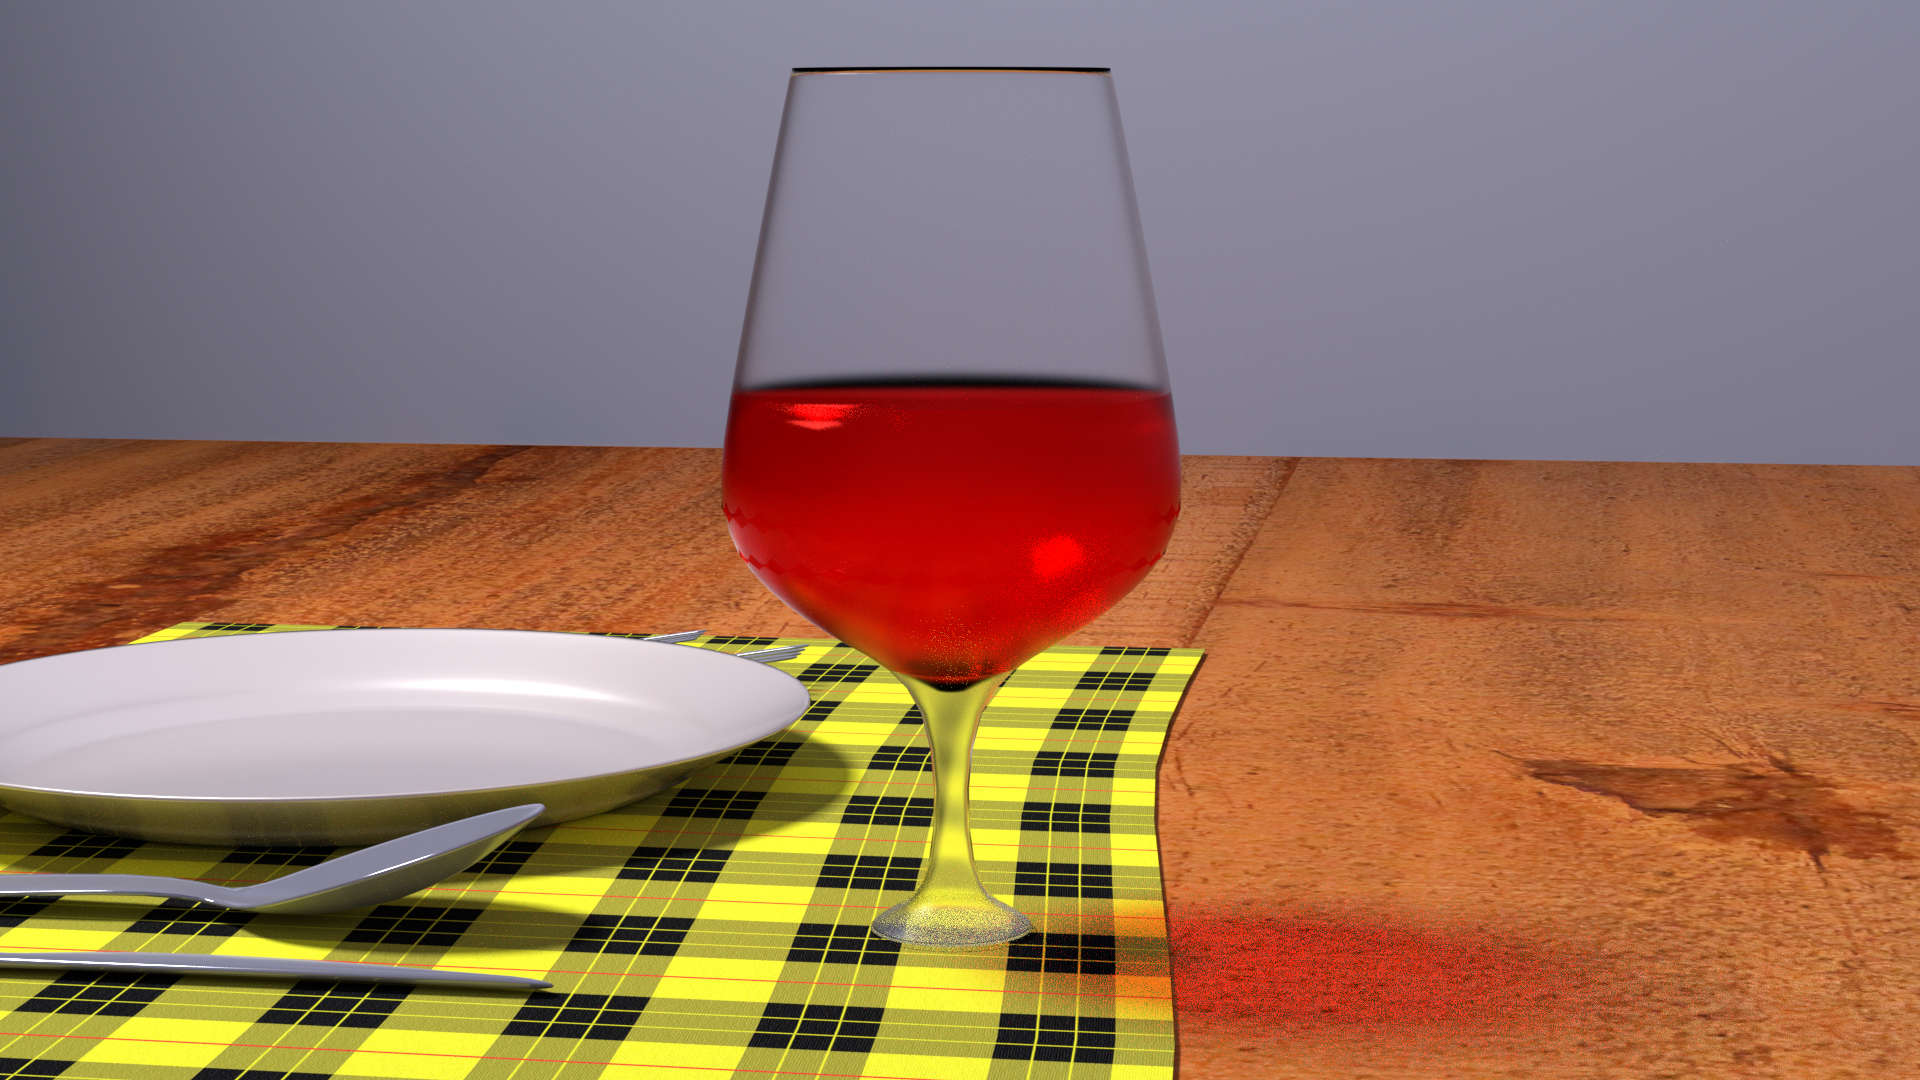 Final render of the table setting